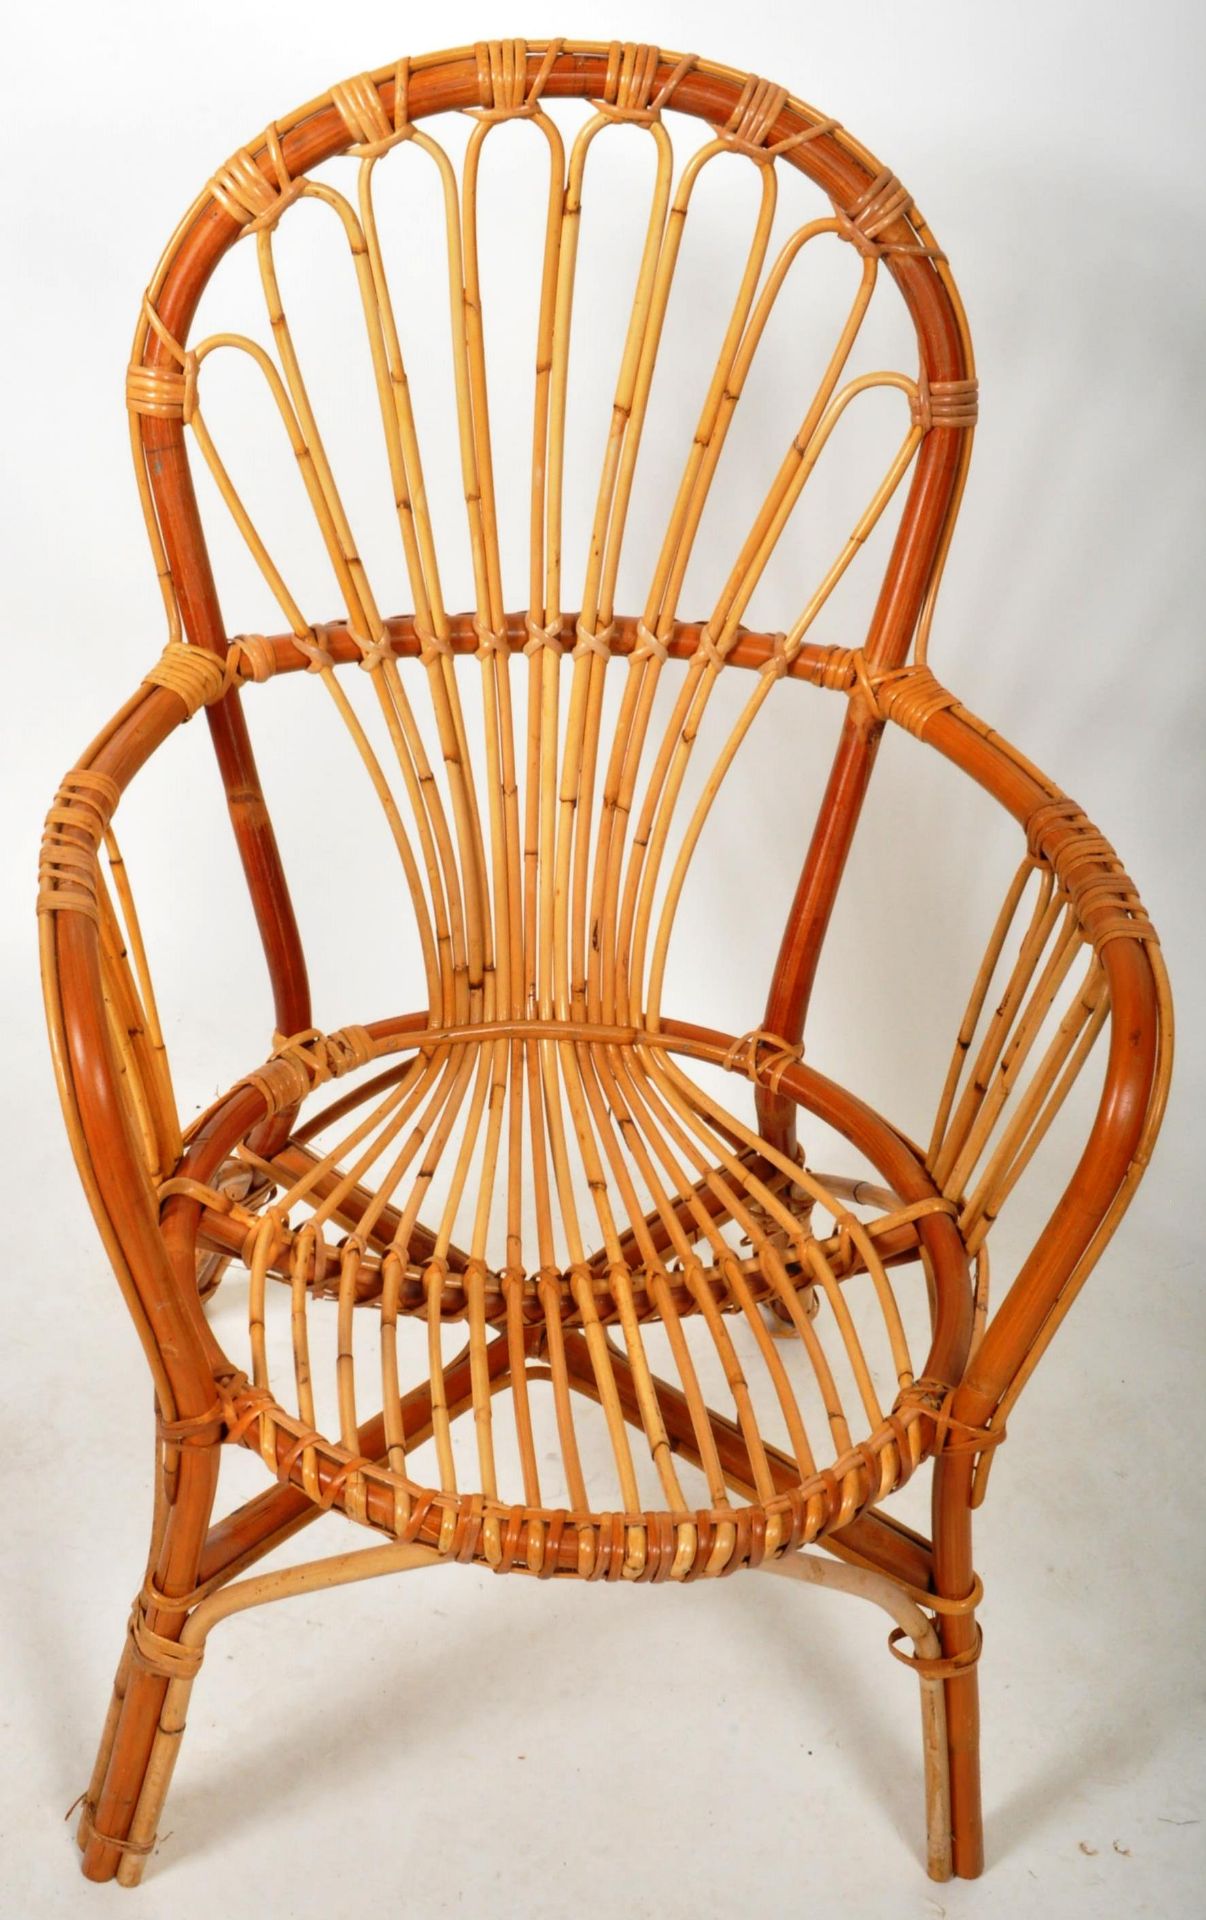 MID 20TH CENTURY ITALIAN BAMBOO AND WICKER / CANE ARMCHAIR - Image 3 of 5